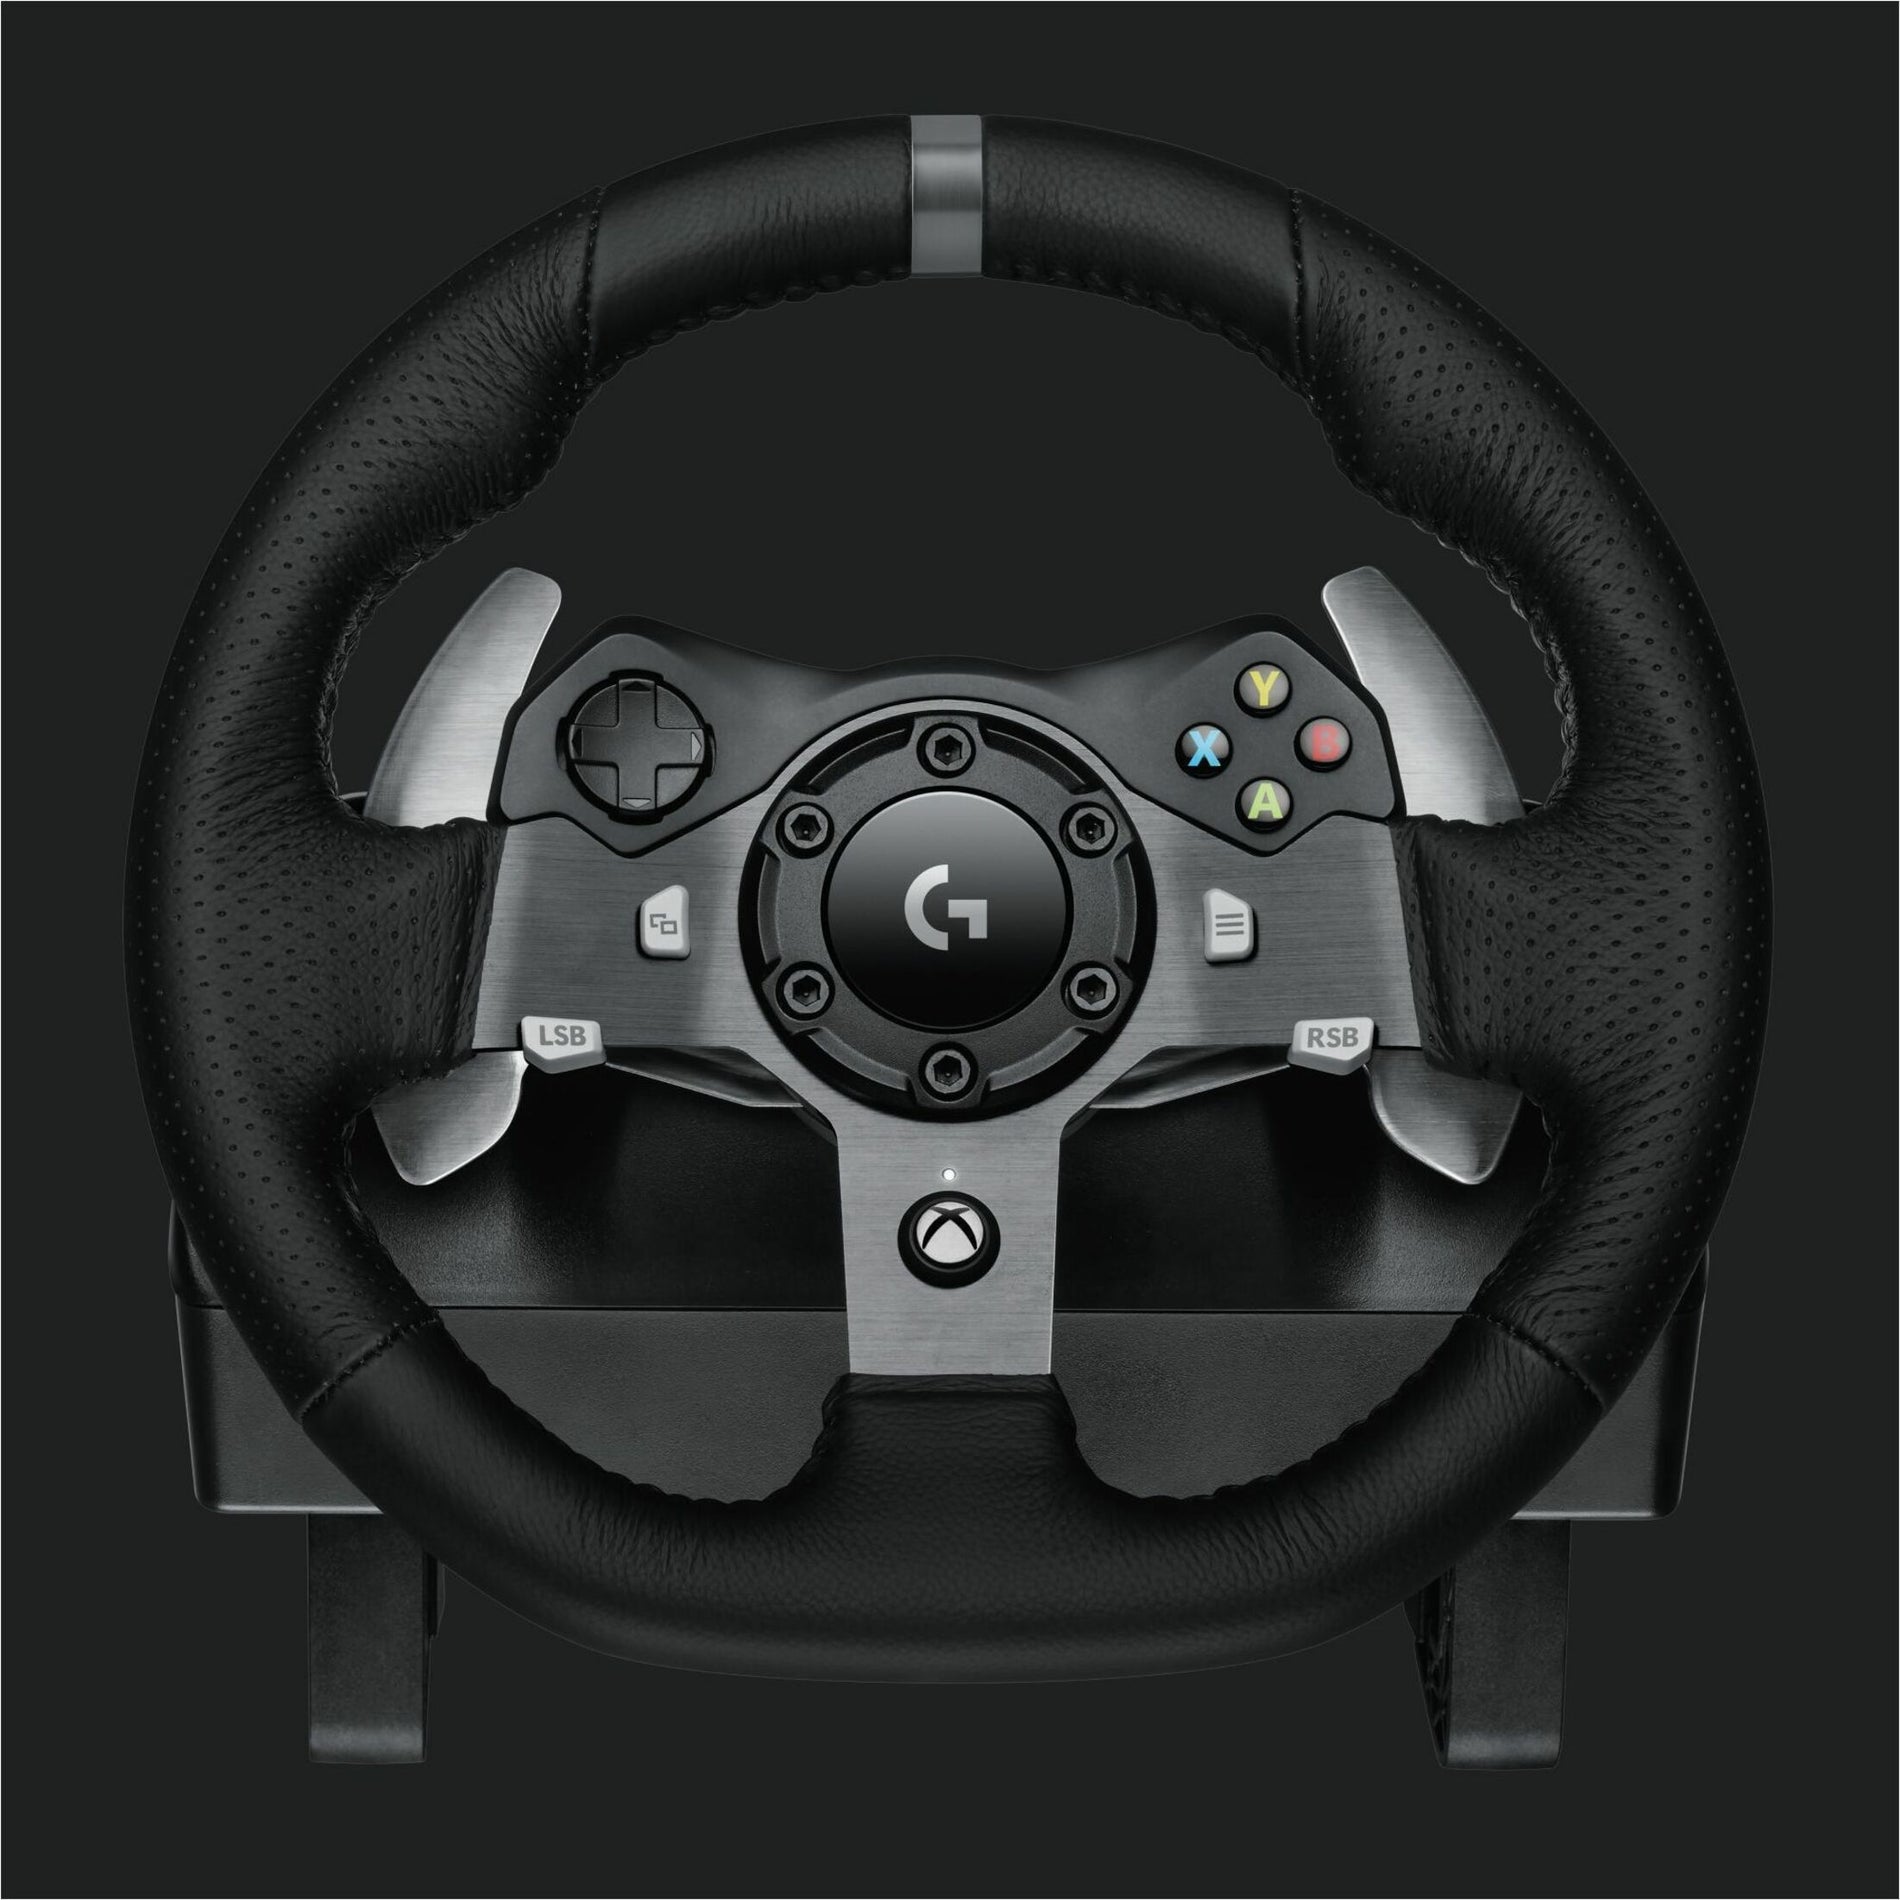 Logitech 941-000121 G920 Driving Force Racing Wheel For Xbox One And PC, 2 Year Warranty, Force Feedback